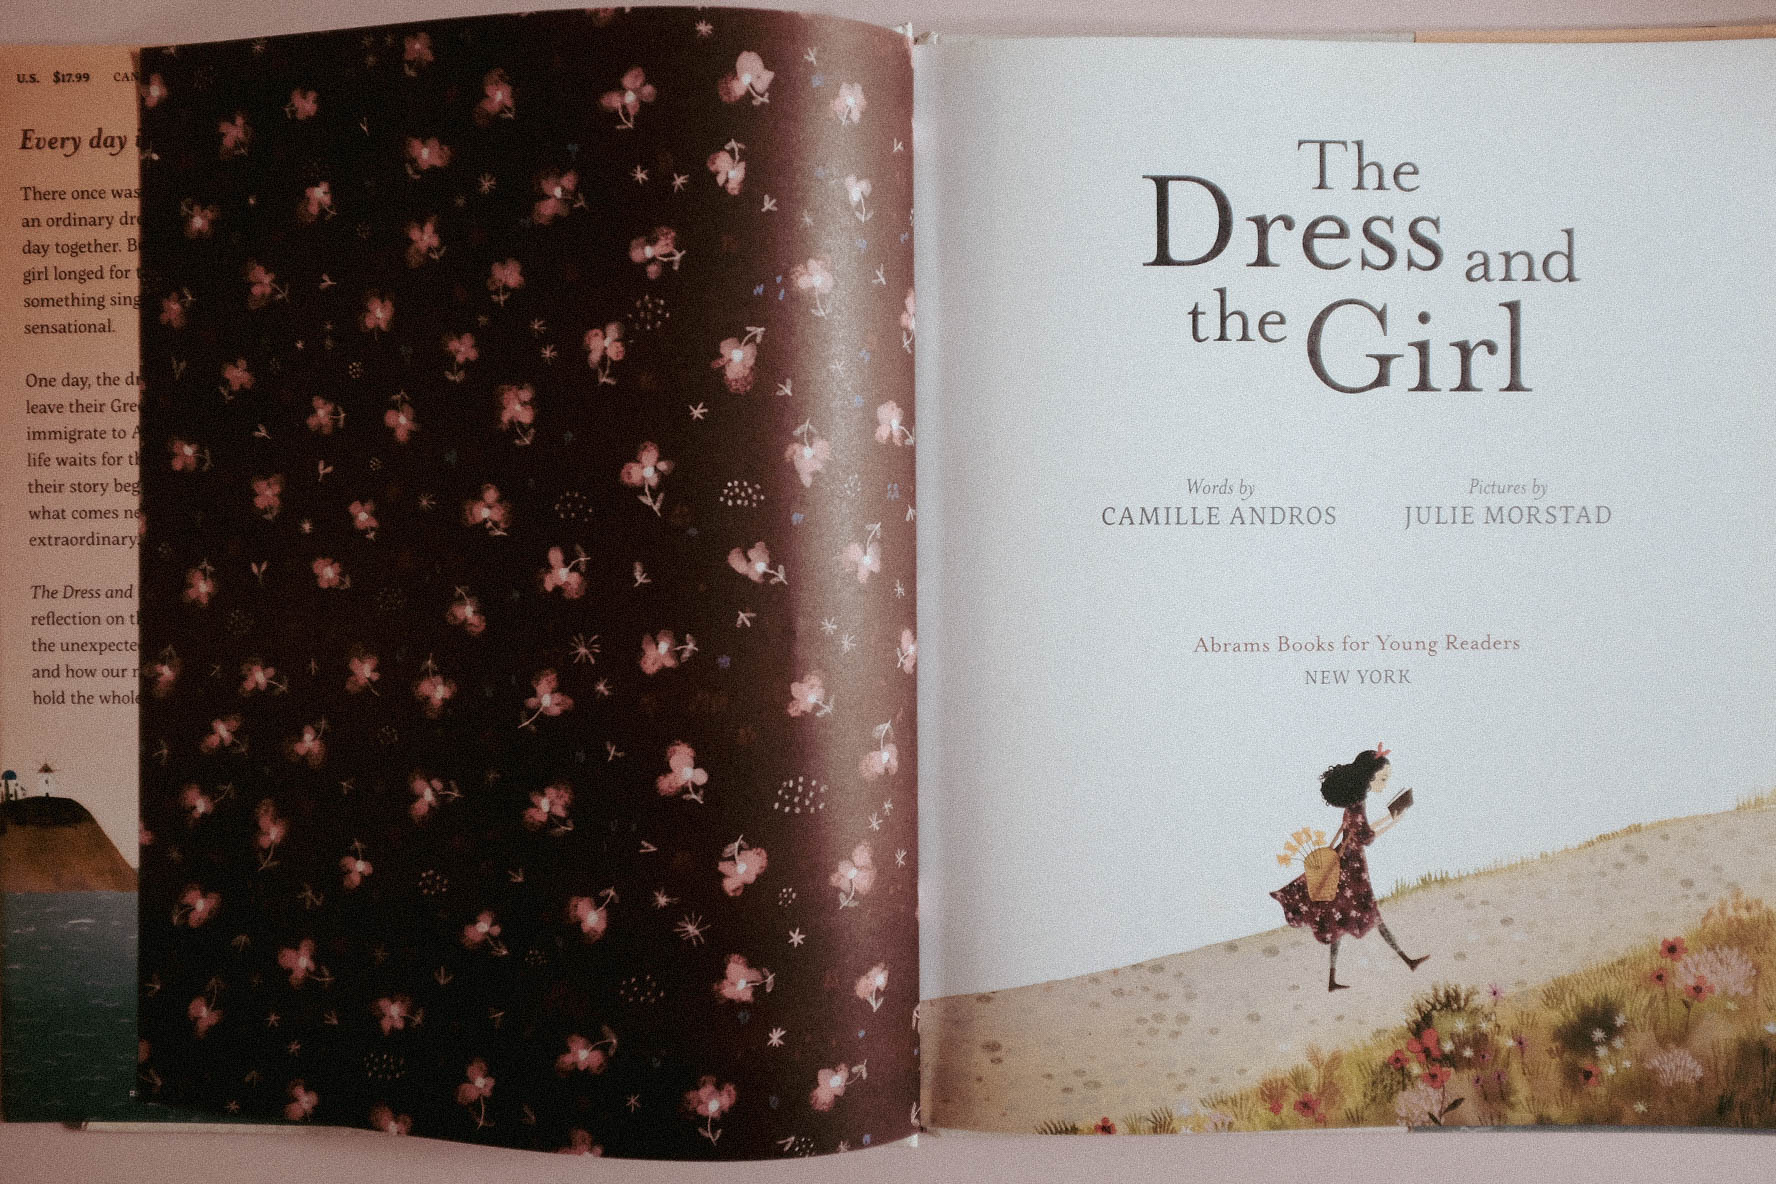 Endpaper for A preview of The Dress and the Girl by Camille Andros. Illustrated by Julie Morstad.